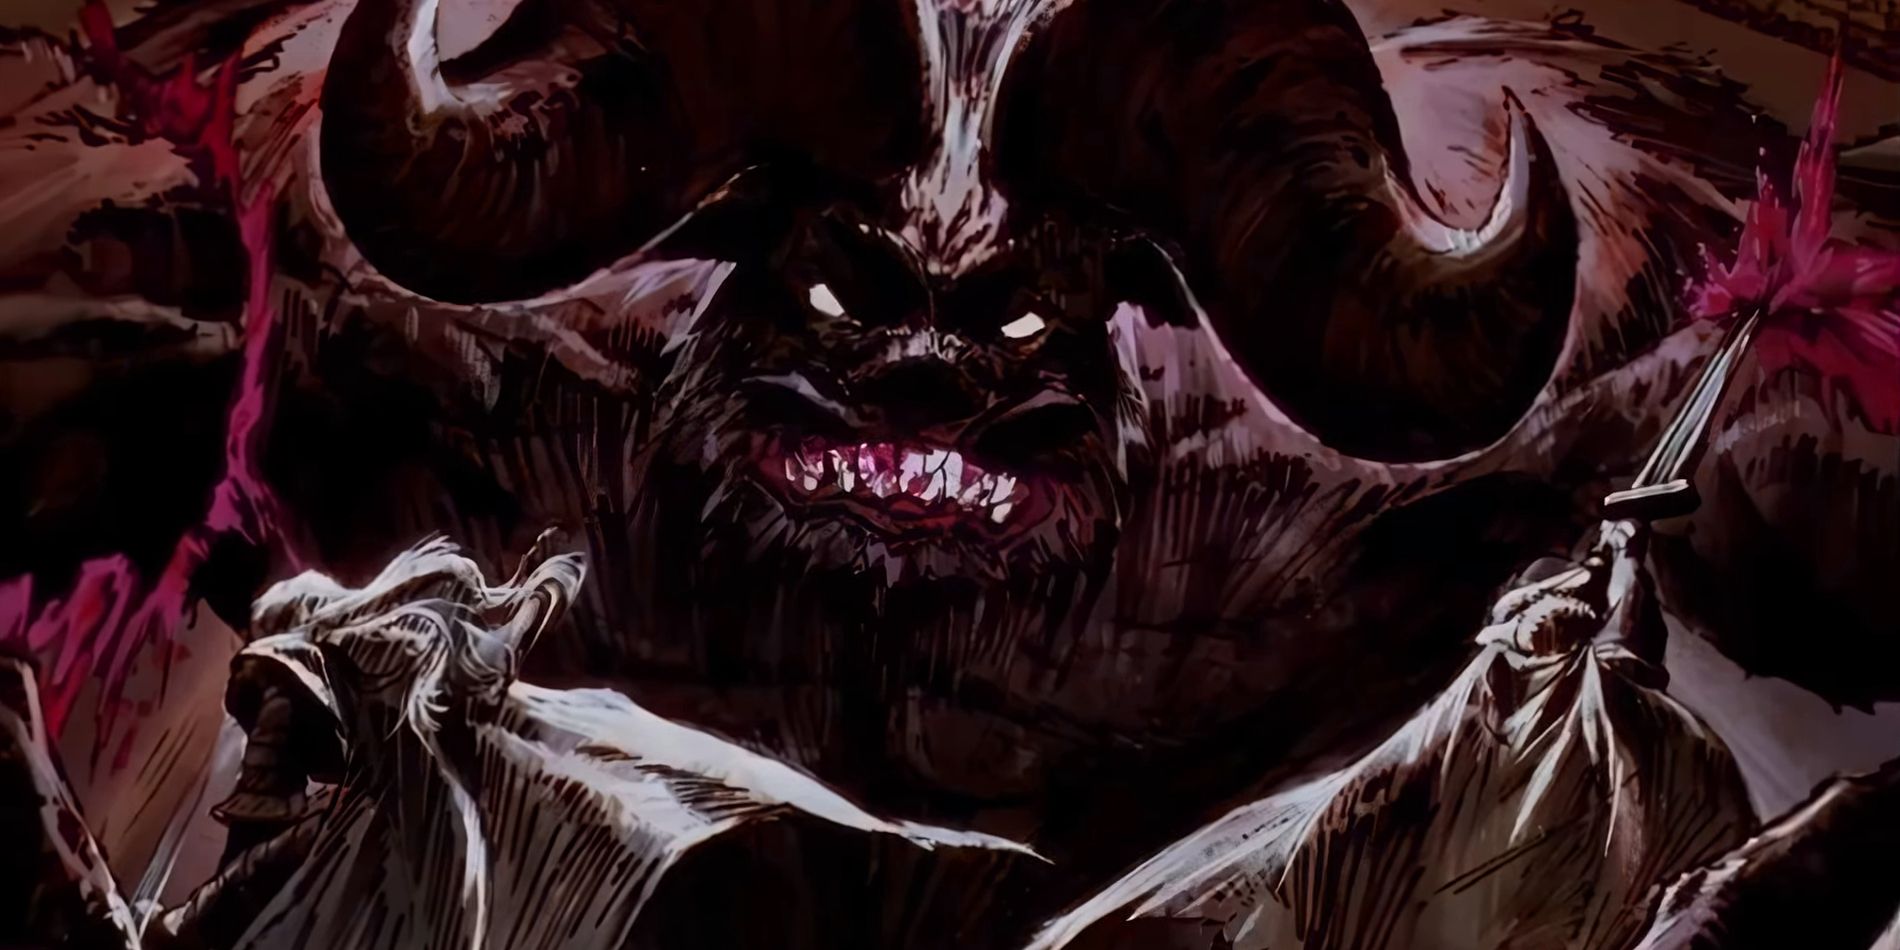 Screenshot from Berserk 1997 anime shows Guts and Griffith fighting Zod in his Final form. Image in drawn with incredible shading and highly stylised silouttes of Guts and Griffith landing strong attacks on eat of Zod's arms which his giant horns and share teeth approach them.